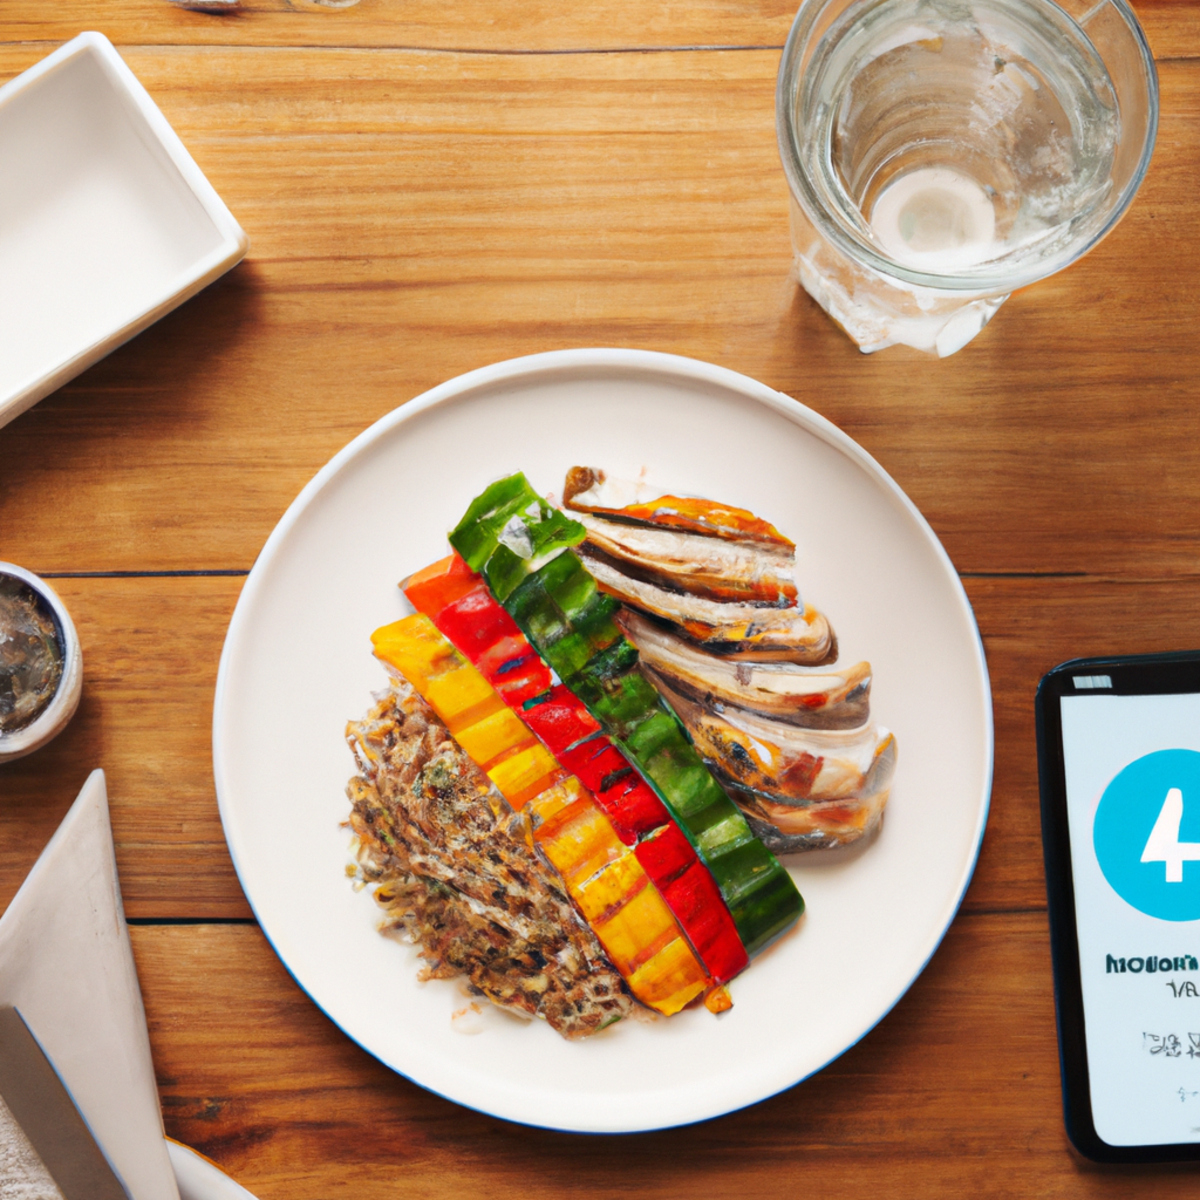 The photo shows a wooden table with a plate of food, a glass of water, and a smartphone displaying a timer app. The plate contains a healthy meal of grilled chicken, roasted vegetables, and quinoa. The portion size is moderate and the plate is colorful, indicating a balanced diet. The glass of water is a reminder to stay hydrated during the fasting period. The timer app on the smartphone suggests that the person is following a specific intermittent fasting schedule. The photo conveys the idea that intermittent fasting can be a healthy and sustainable way to manage weight and improve overall health.